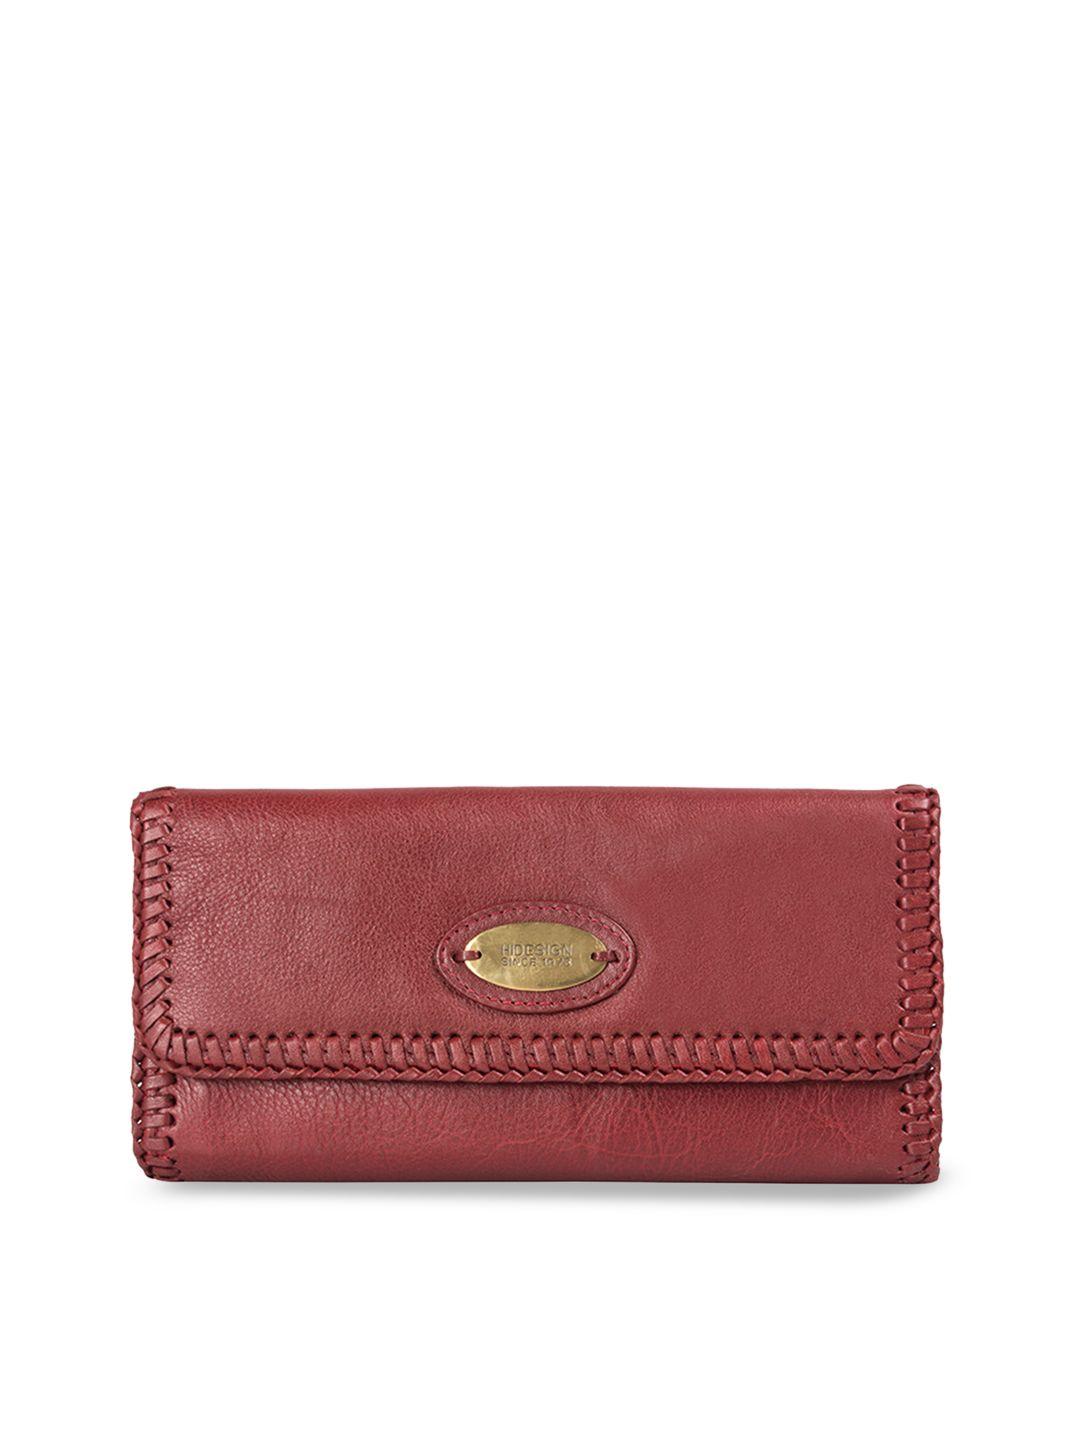 hidesign women maroon solid leather two fold wallet